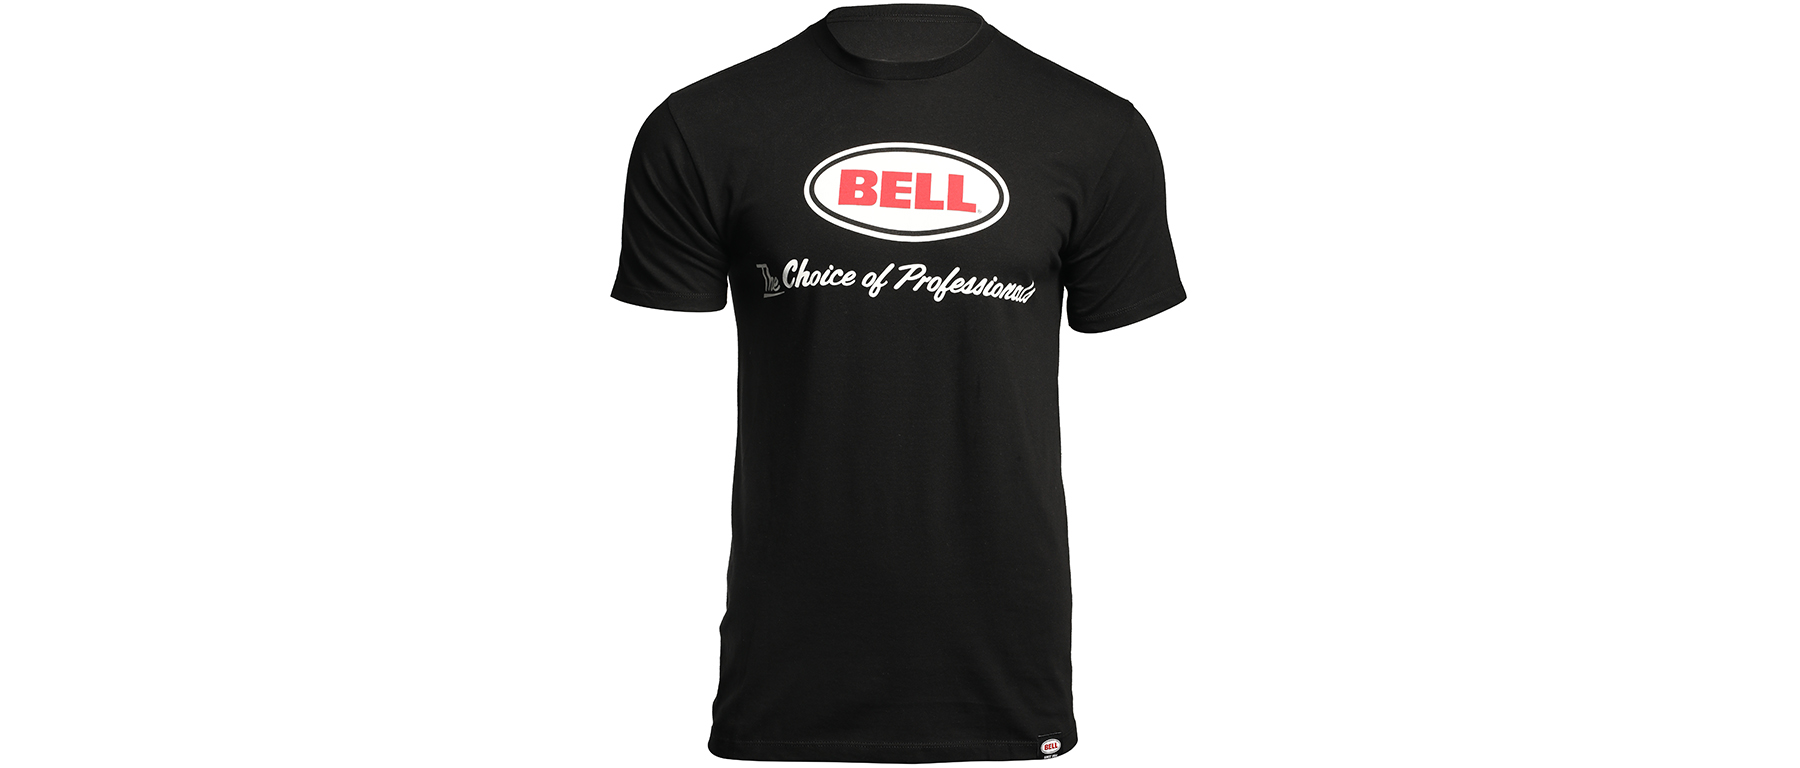 Bell Choice of Pros T-Shirt